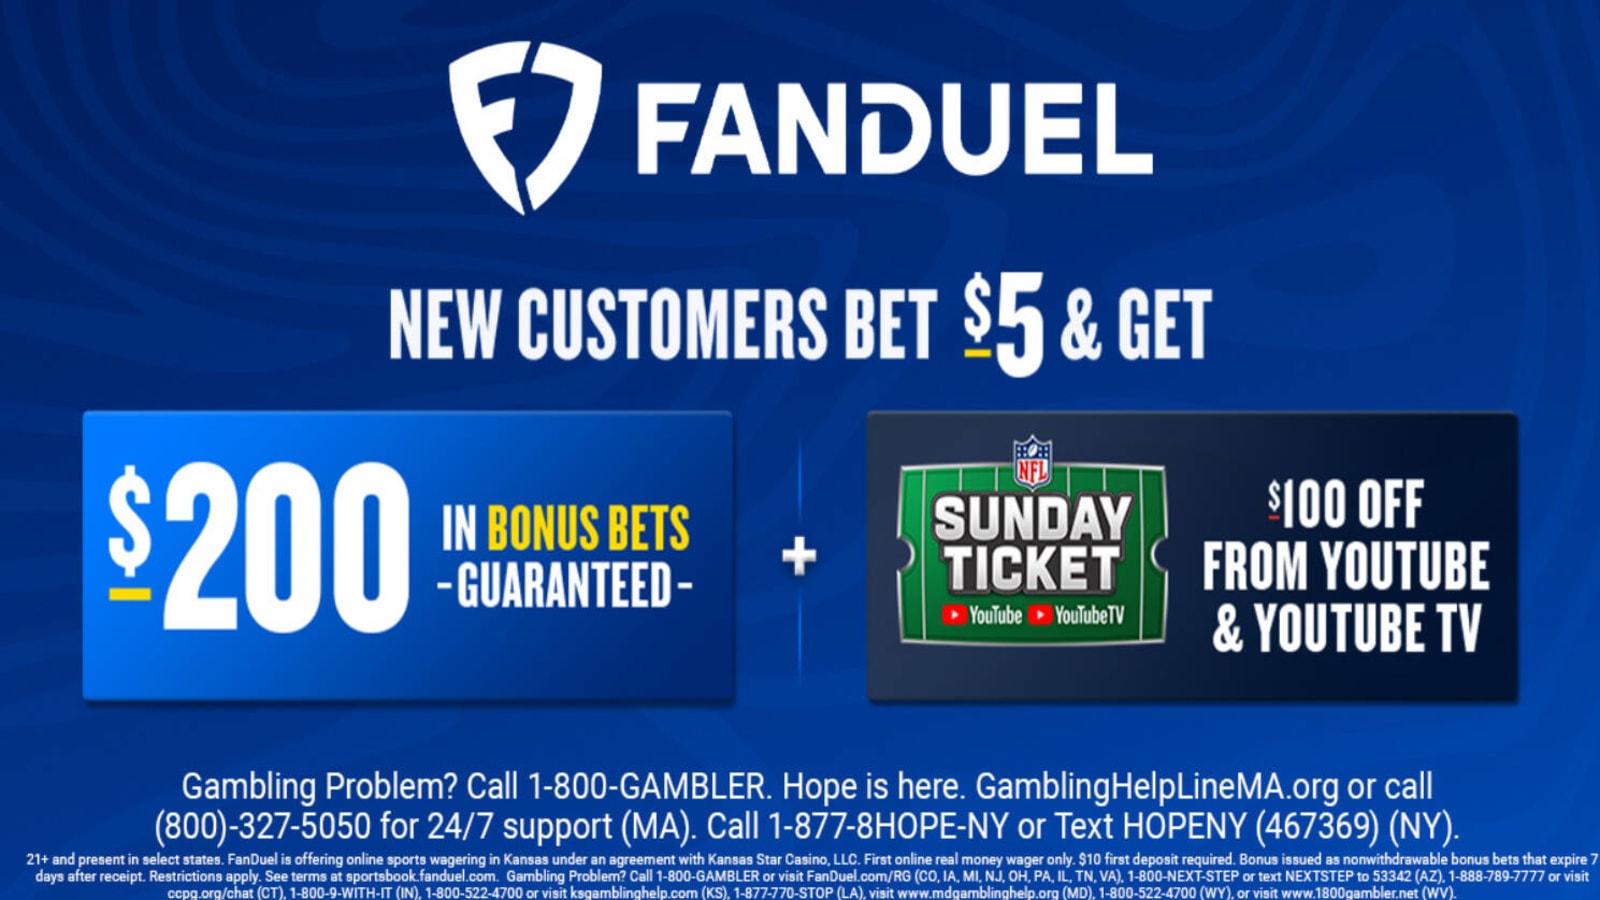 FanDuel NFL Sunday Ticket Promo Code or NFL SunFanDuel NFL Sunday Ticket  Promo Code or NFL Sunday Ticket Student Discount? What's the Best Promo for    TVday Ticket Student Discount? What's the